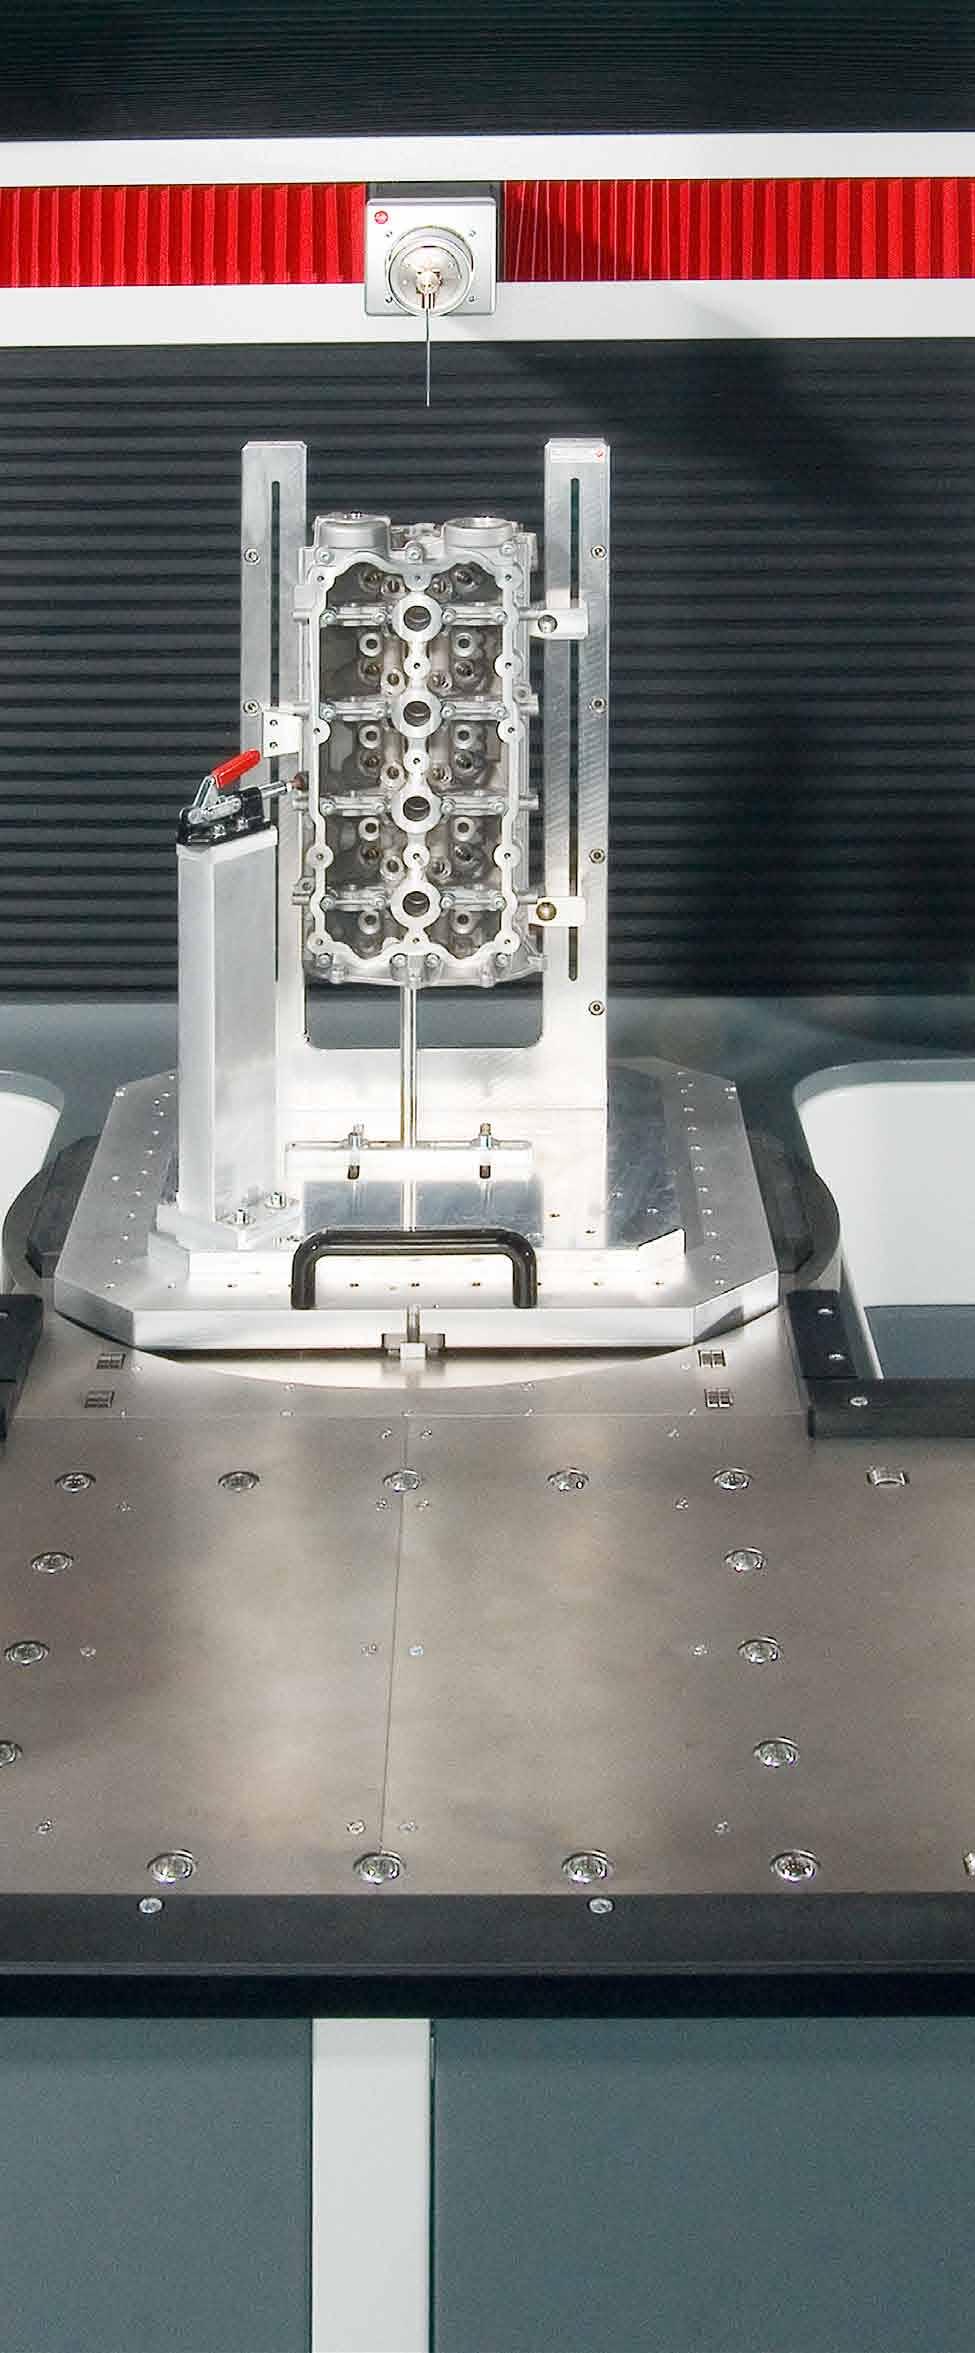 Power CMM for powertrain. Through its unique axes arrangement with horizontal arm and infinitely positionable rotary table, the Leitz SIRIO SX achieves outstanding inspection throughputs.